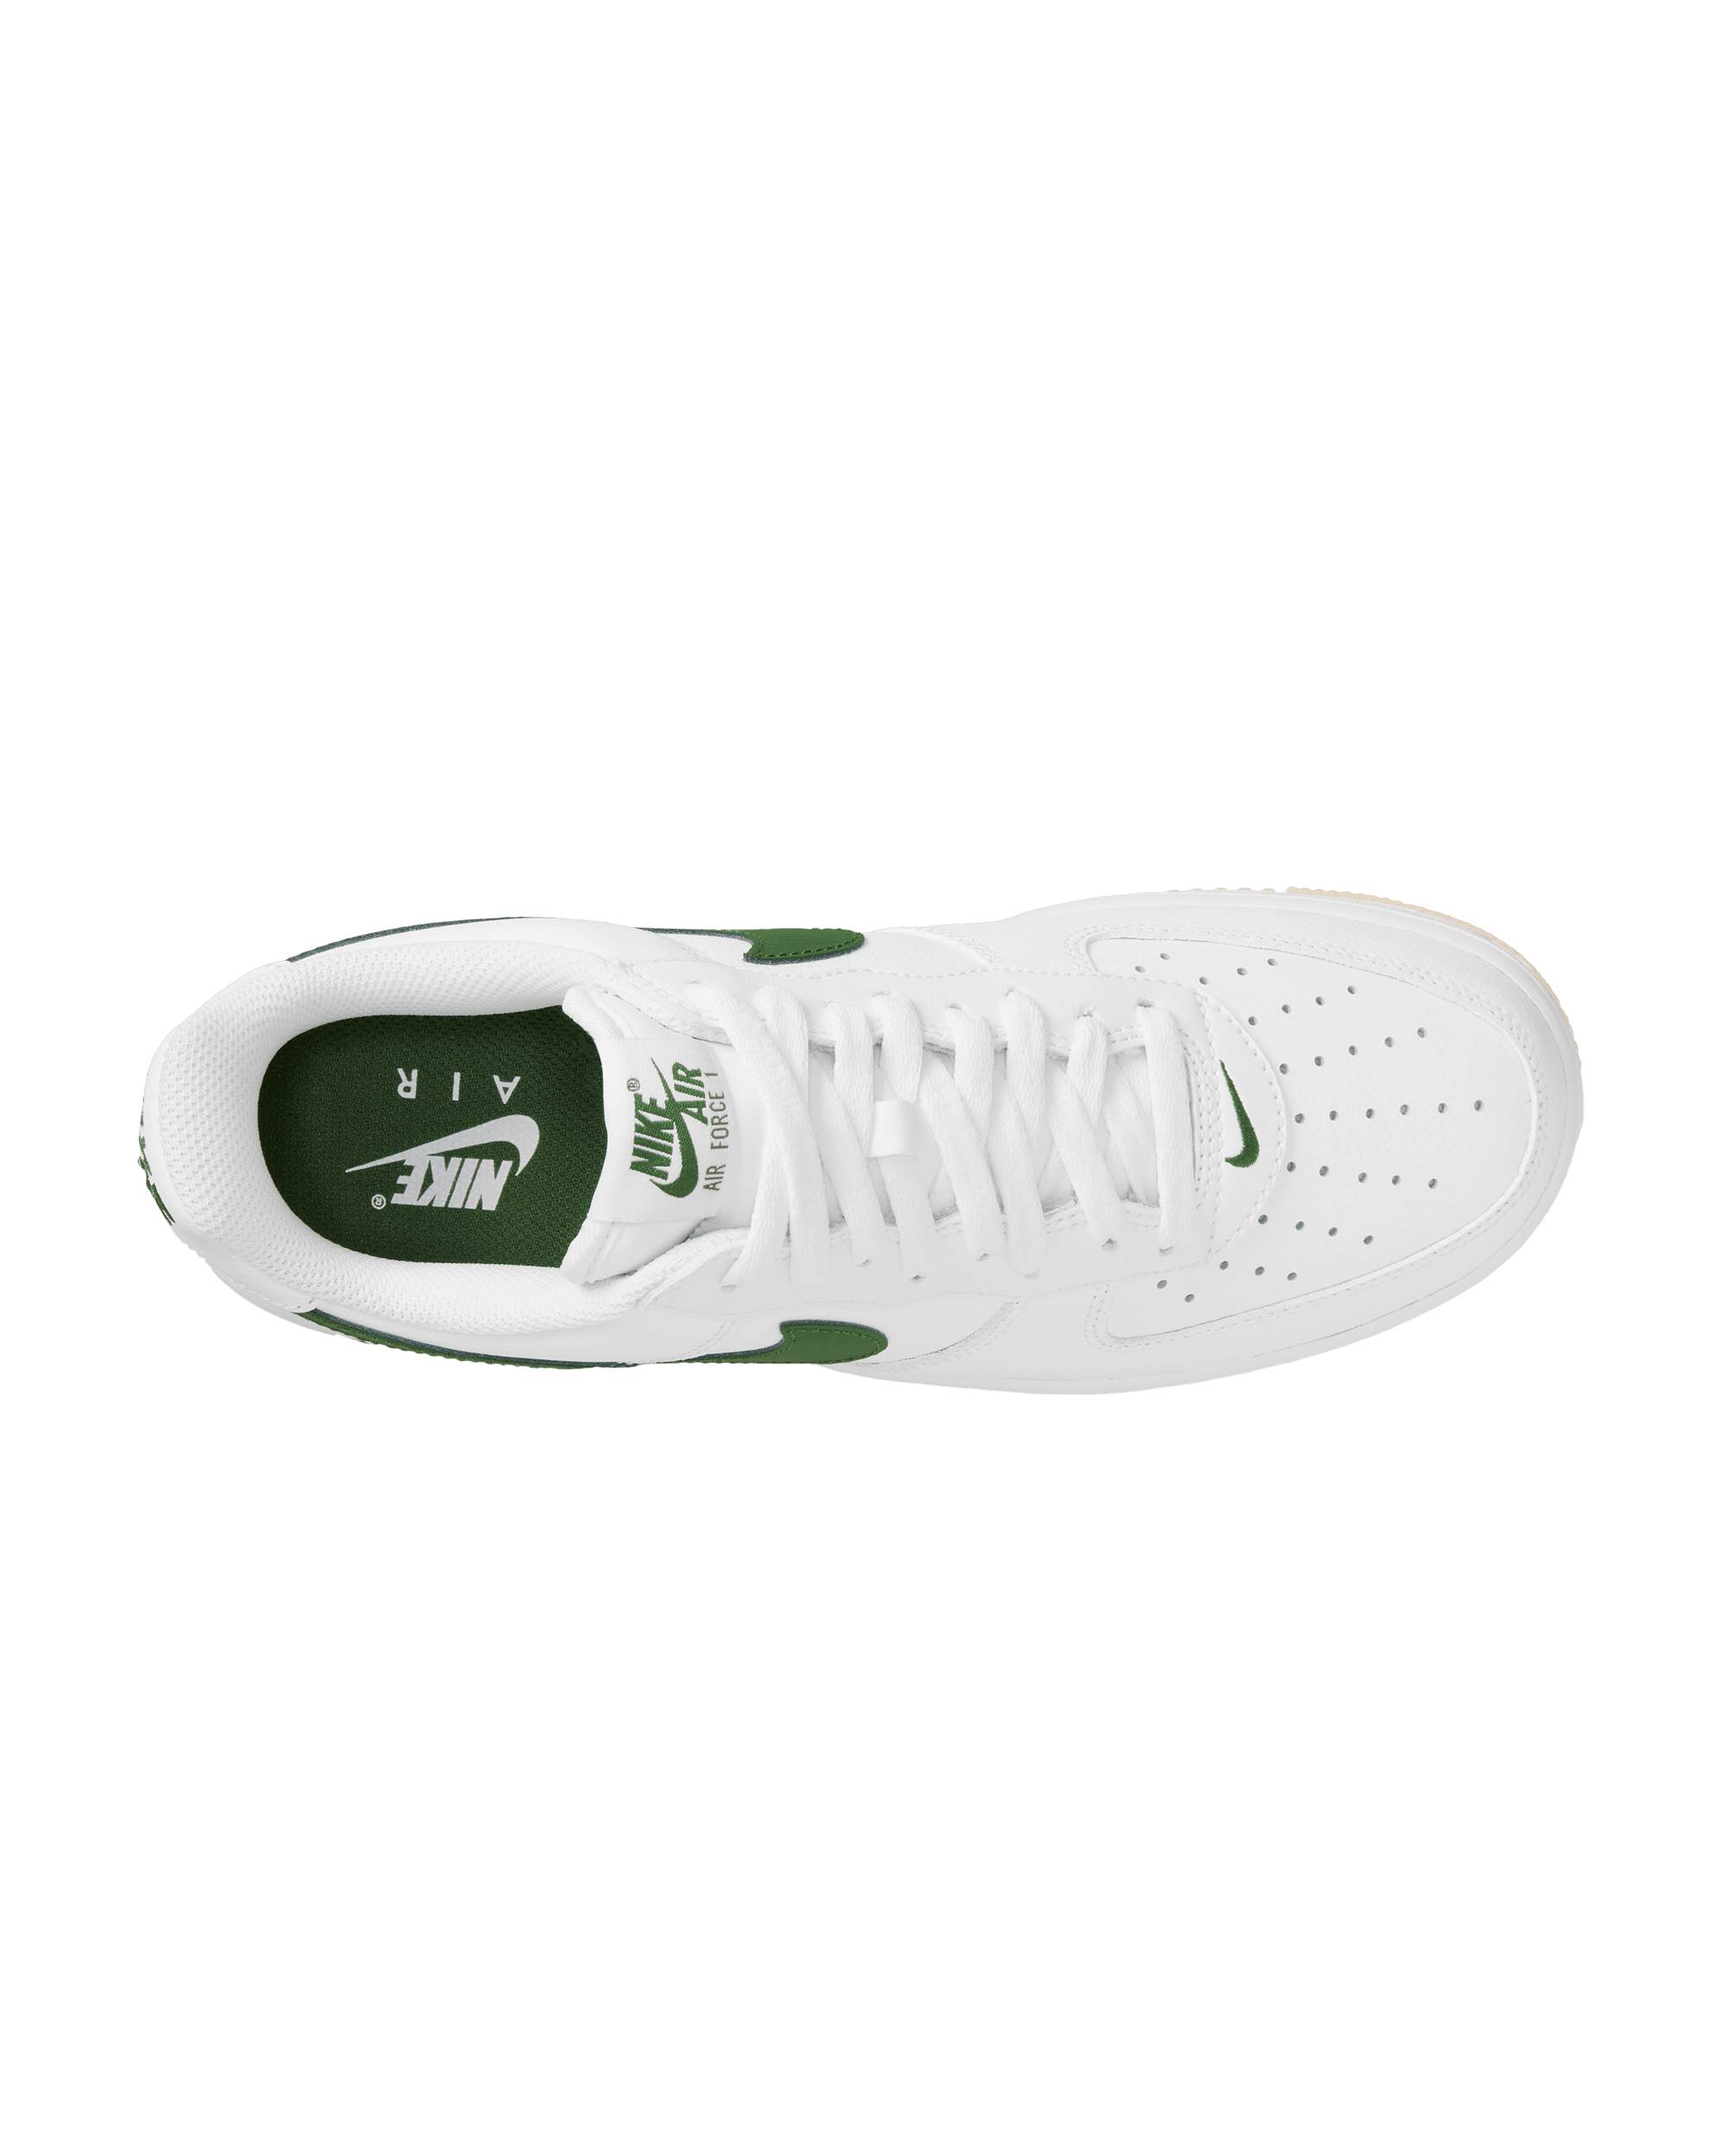 Air Force 1 Low Retro - White / Forest Green / Yellow Gum